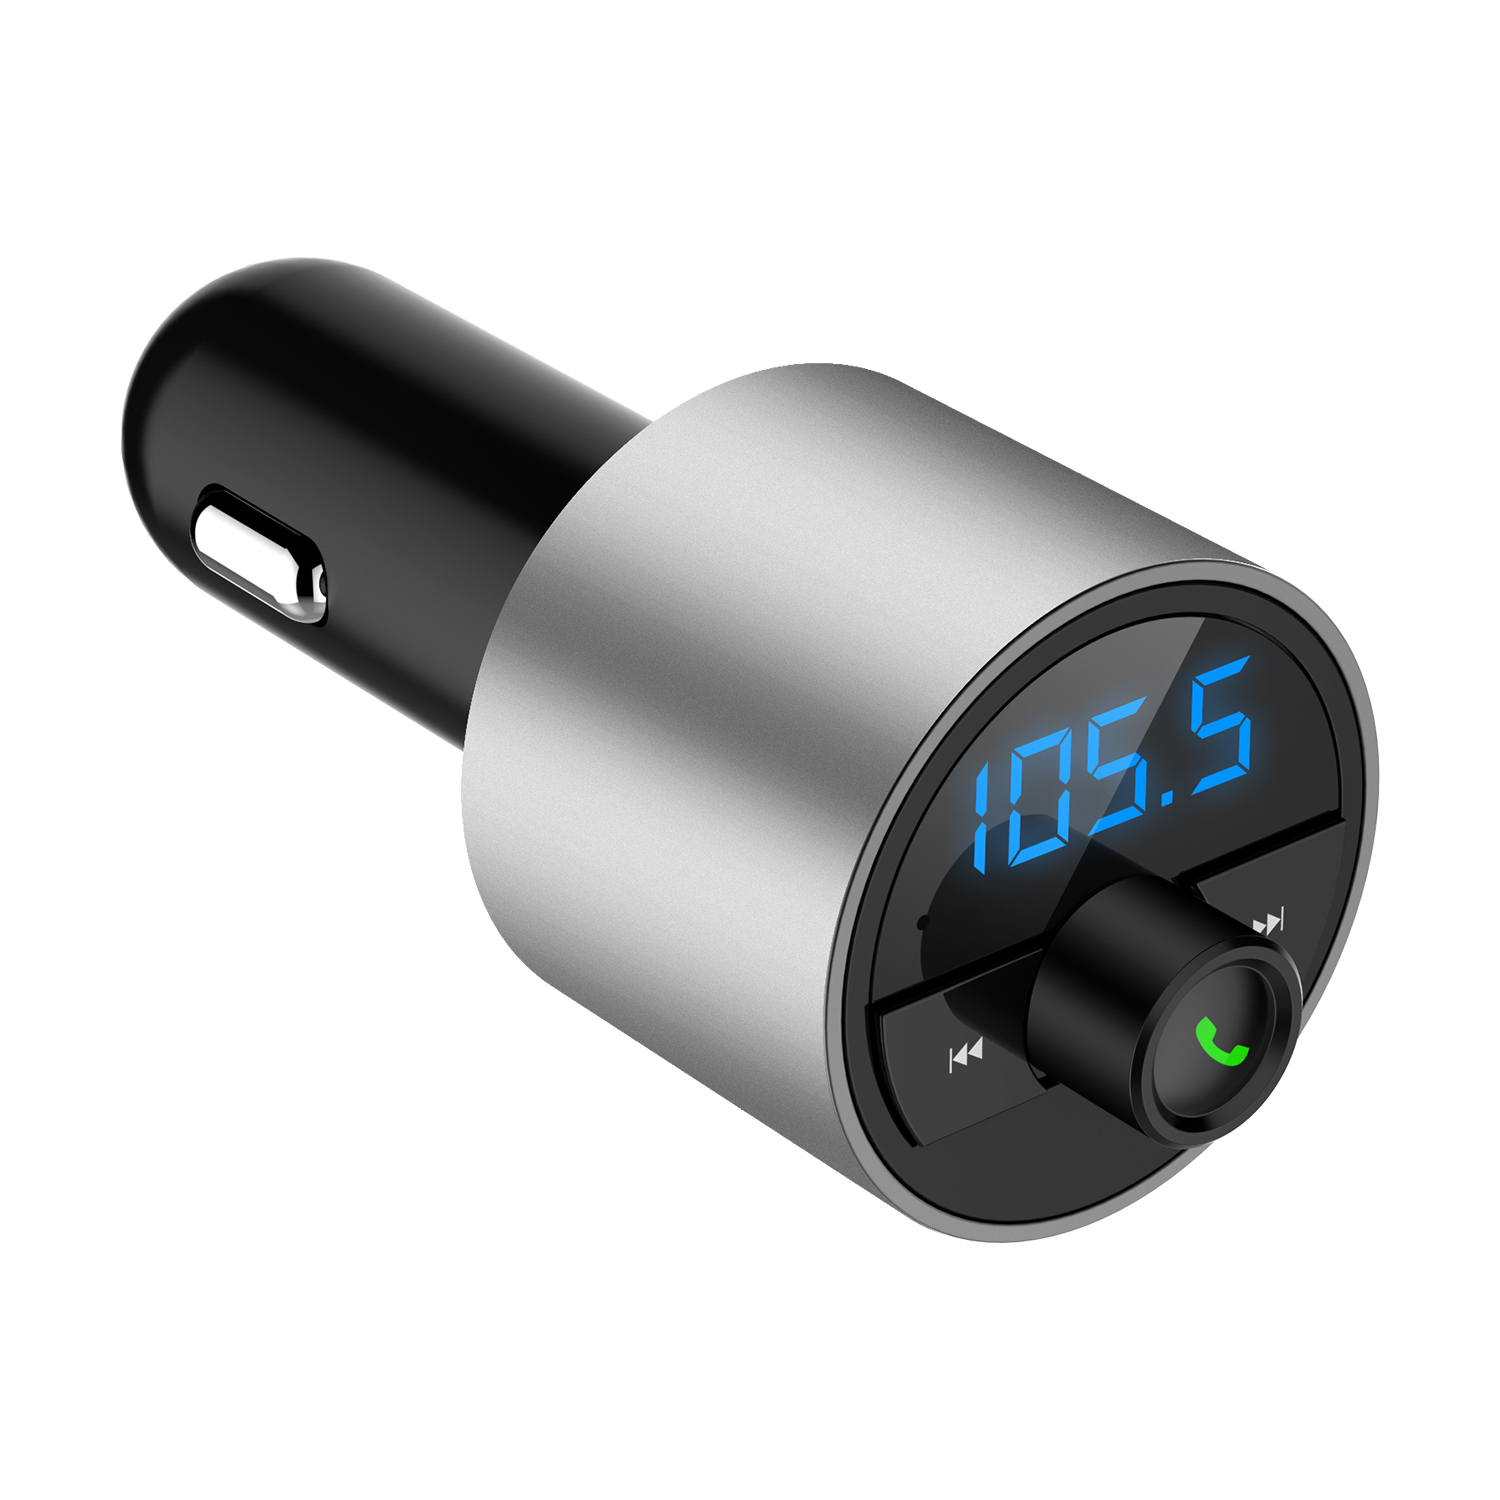 Mini LED Display Dual USB bluetooth Hands-free Smart Quick Wireless 3.6A Car Charger with Microphone 1